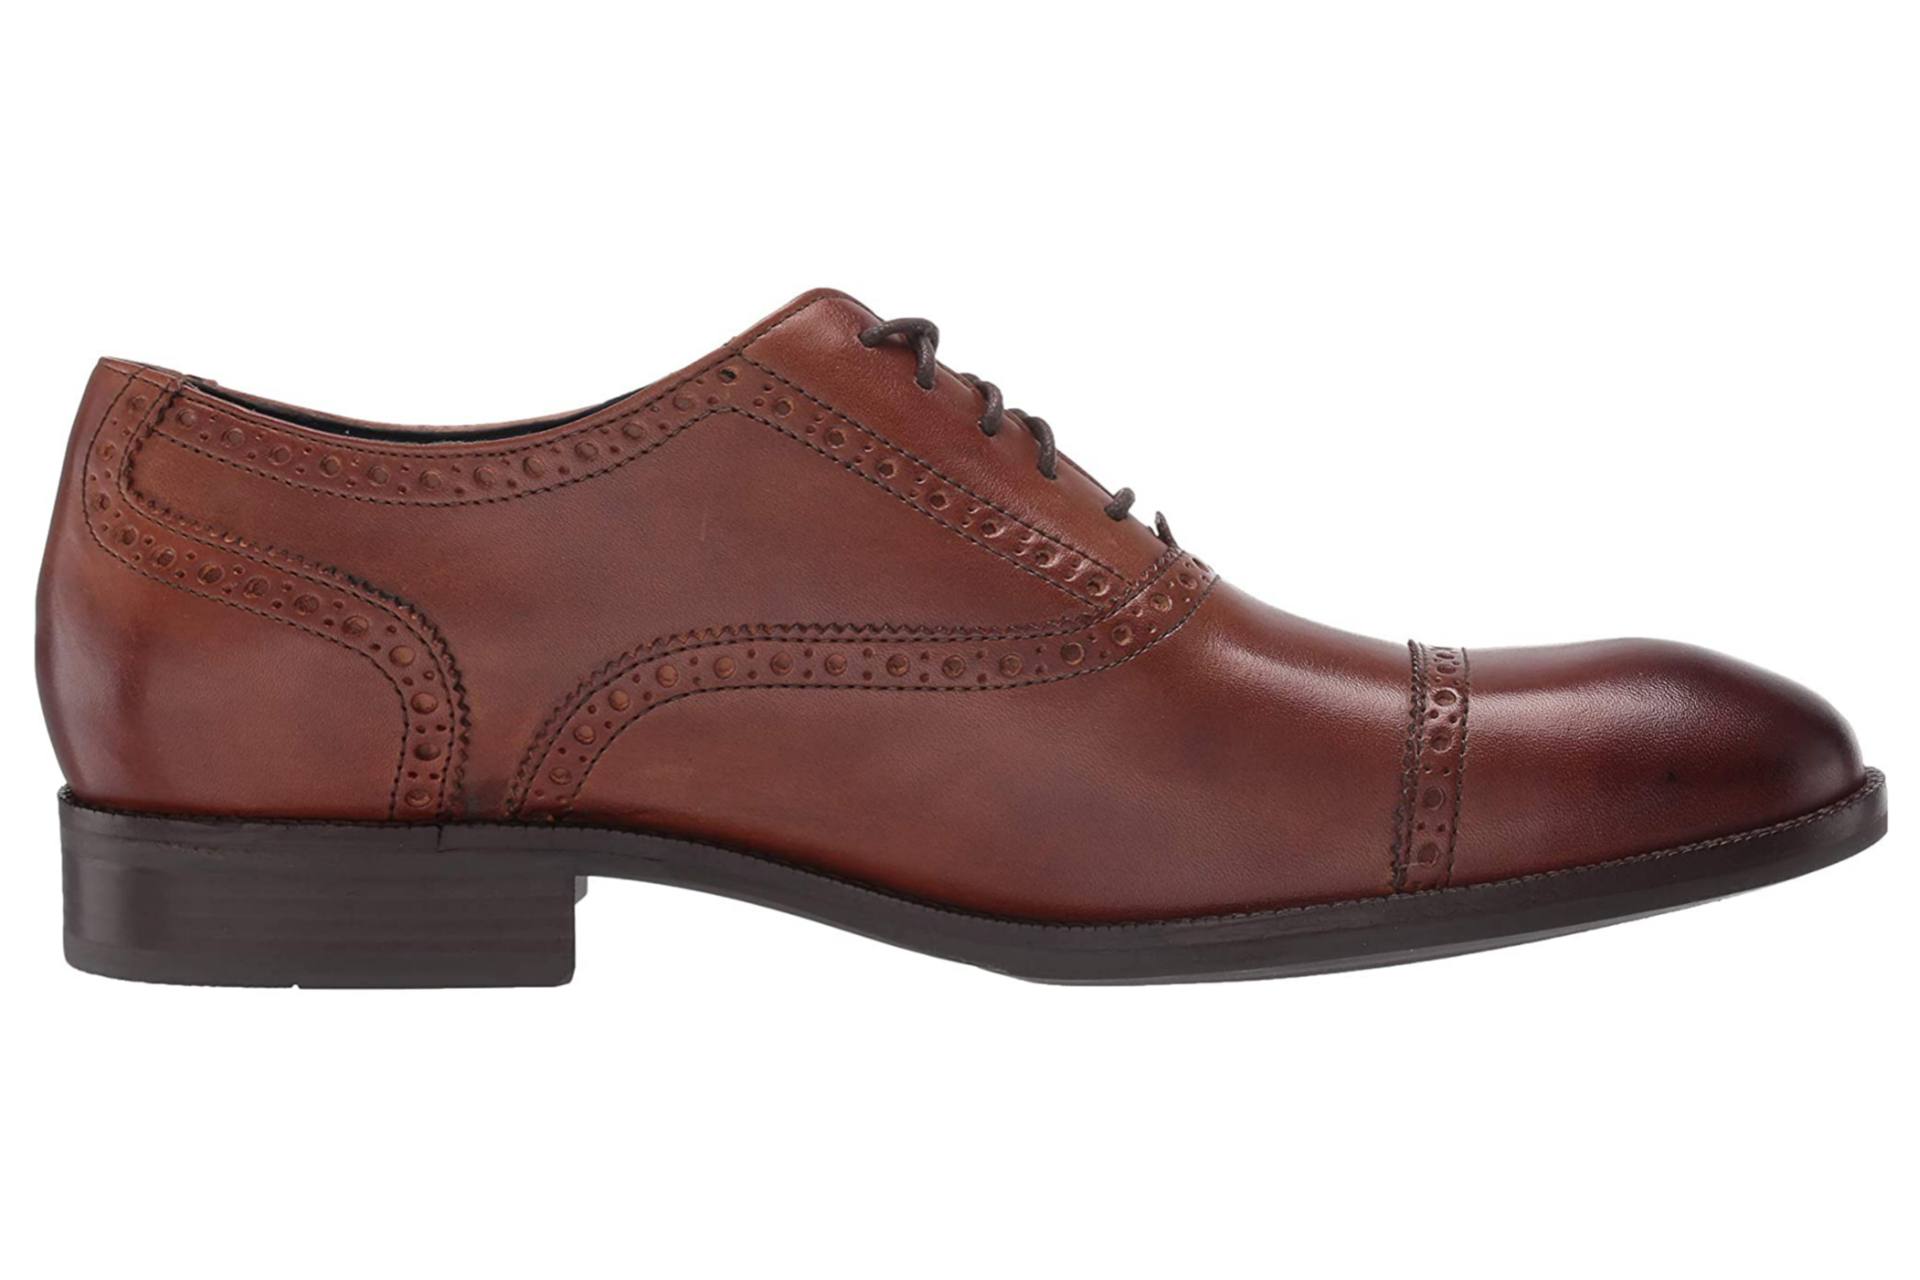 Work oxford shoes for men